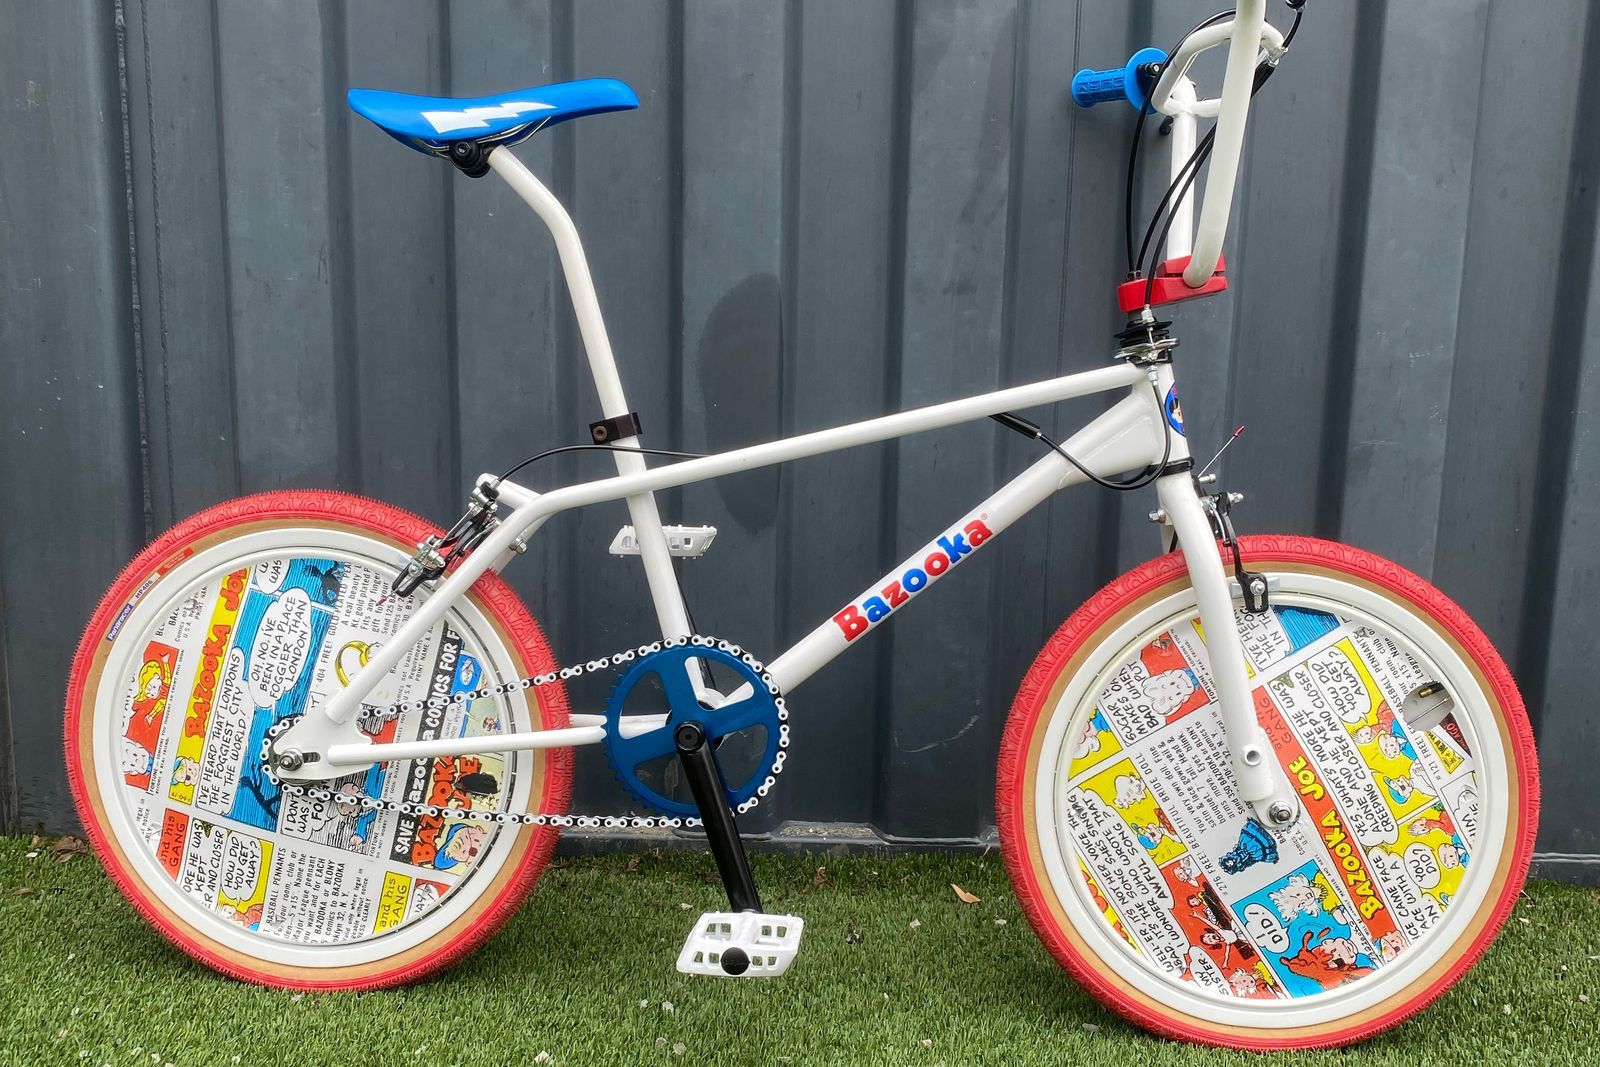 A white bike with blue handlebars, gear and seat and the Bazooka logo on the frame, featuring red wheels with Bazooka Joe comics in the center. The bike is on grass and leaning against a gray fence.